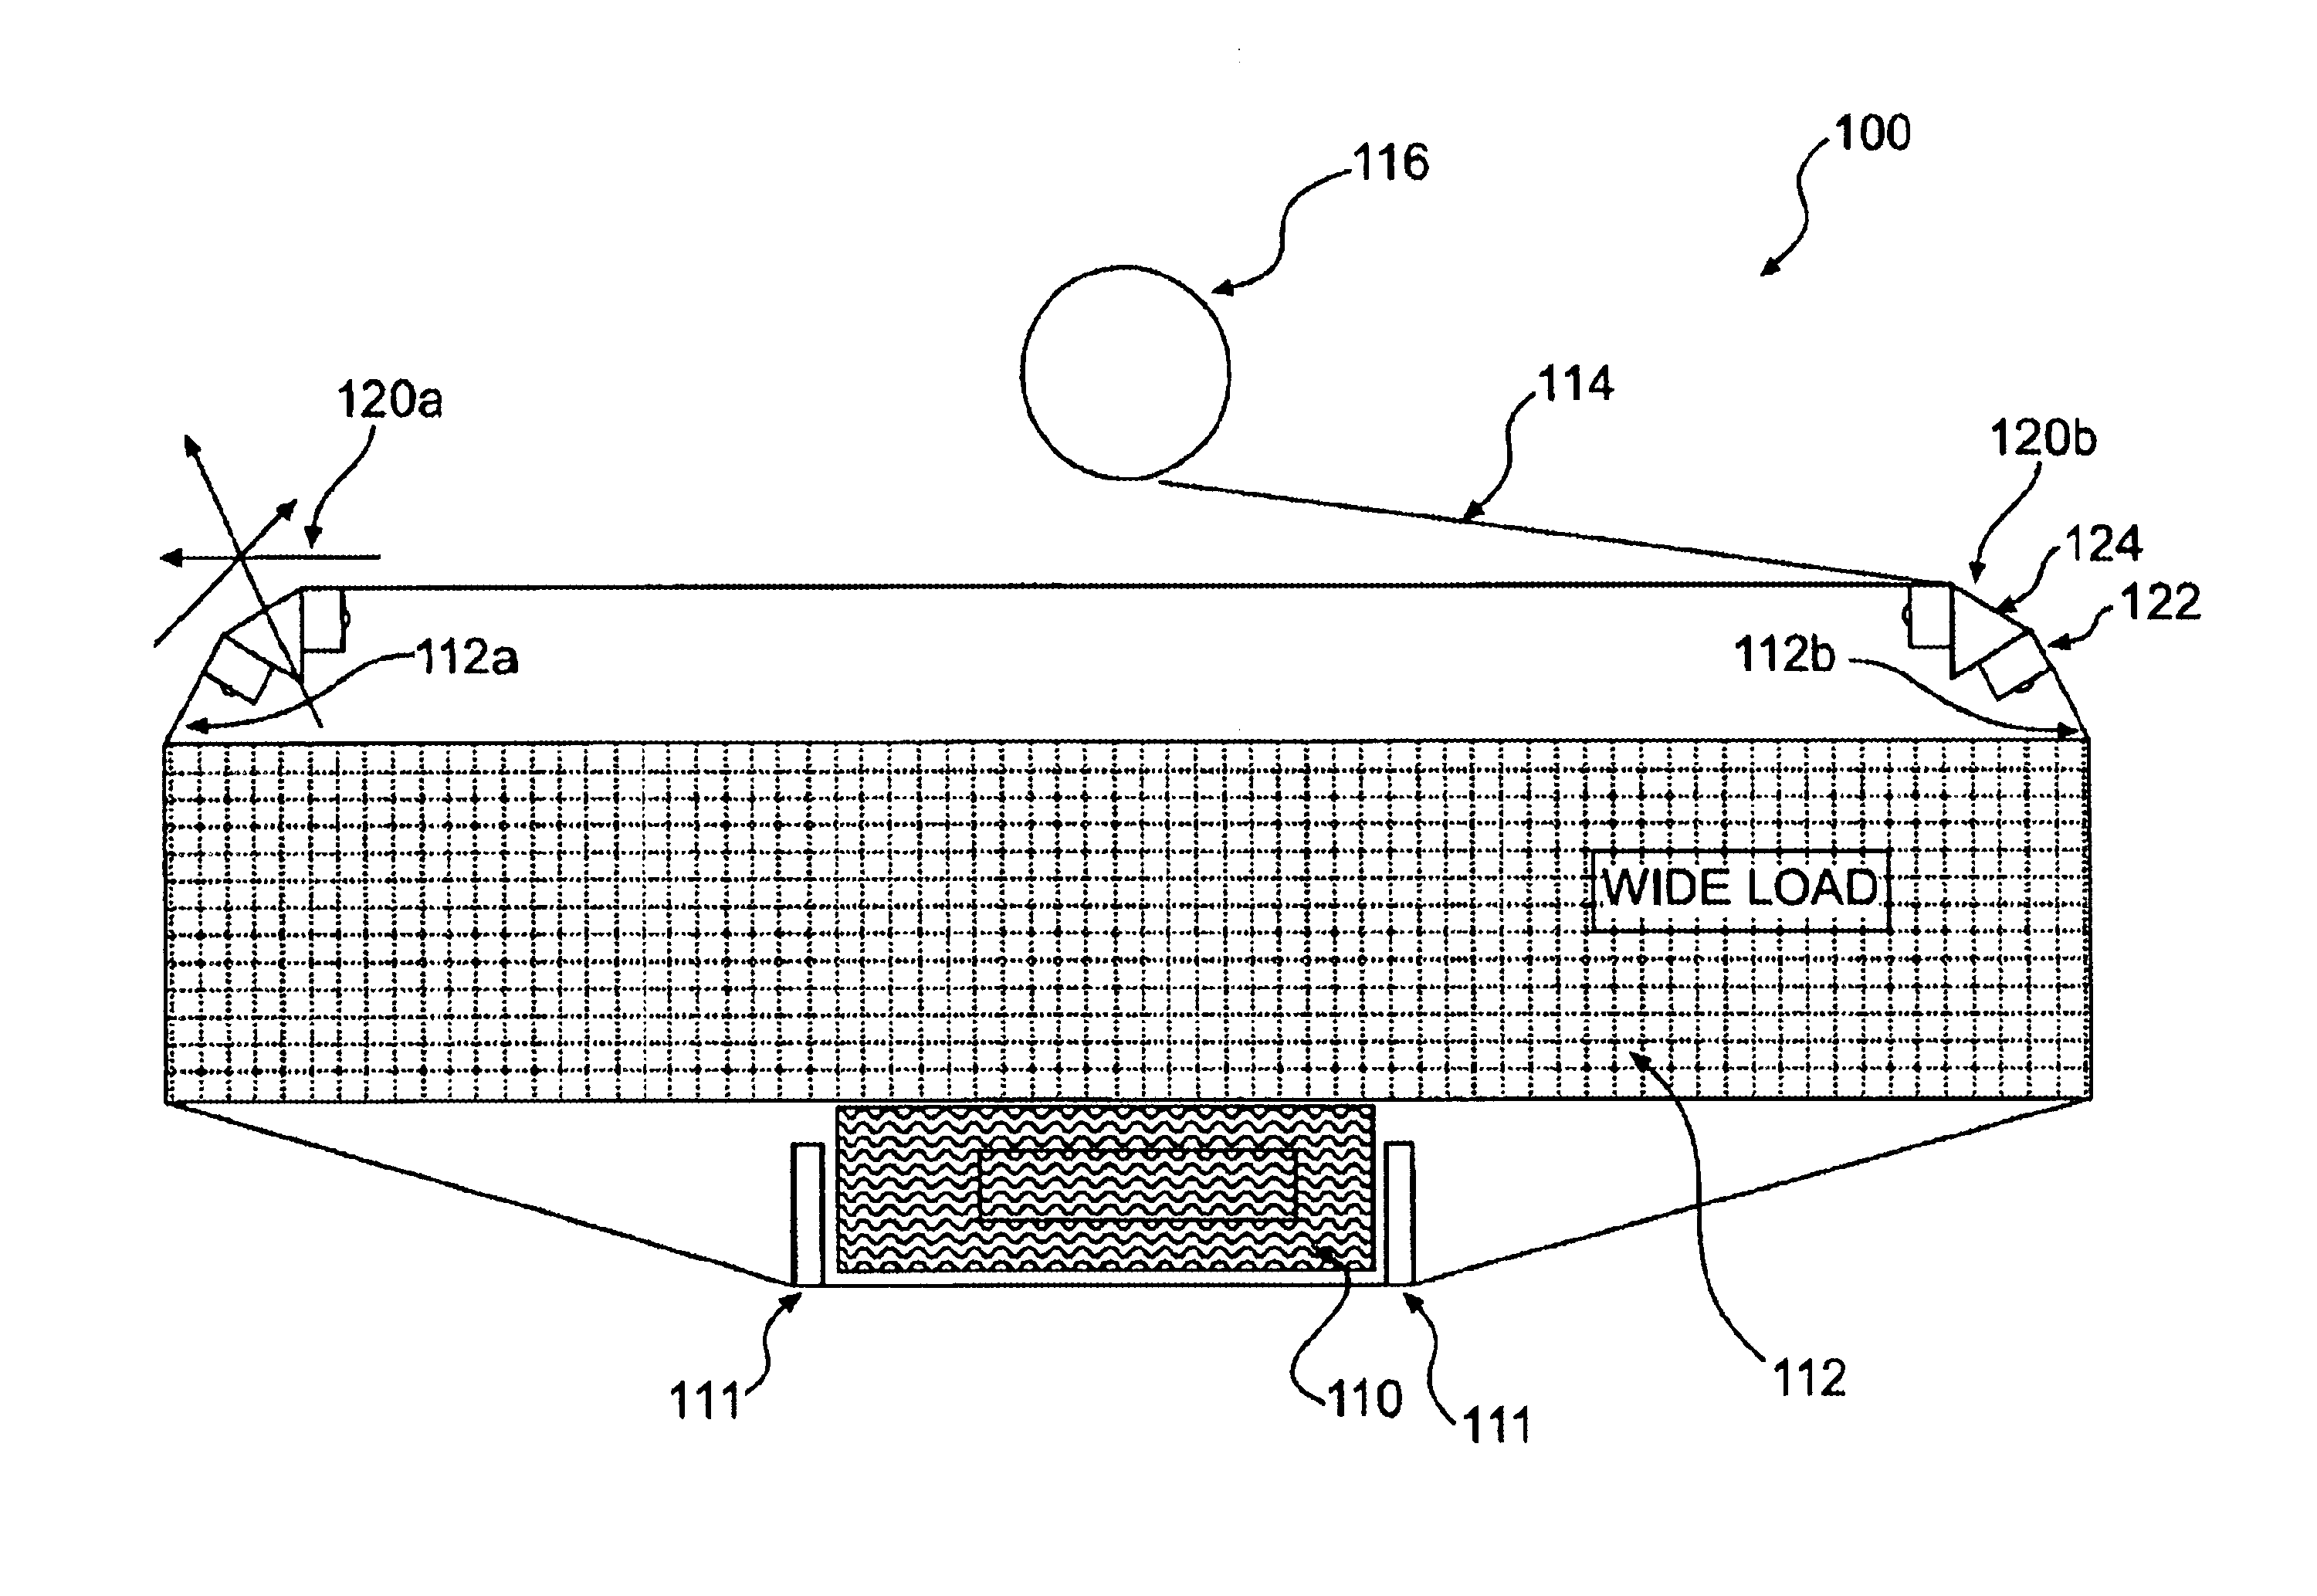 Method and apparatus for wrapping a top and bottom of a load